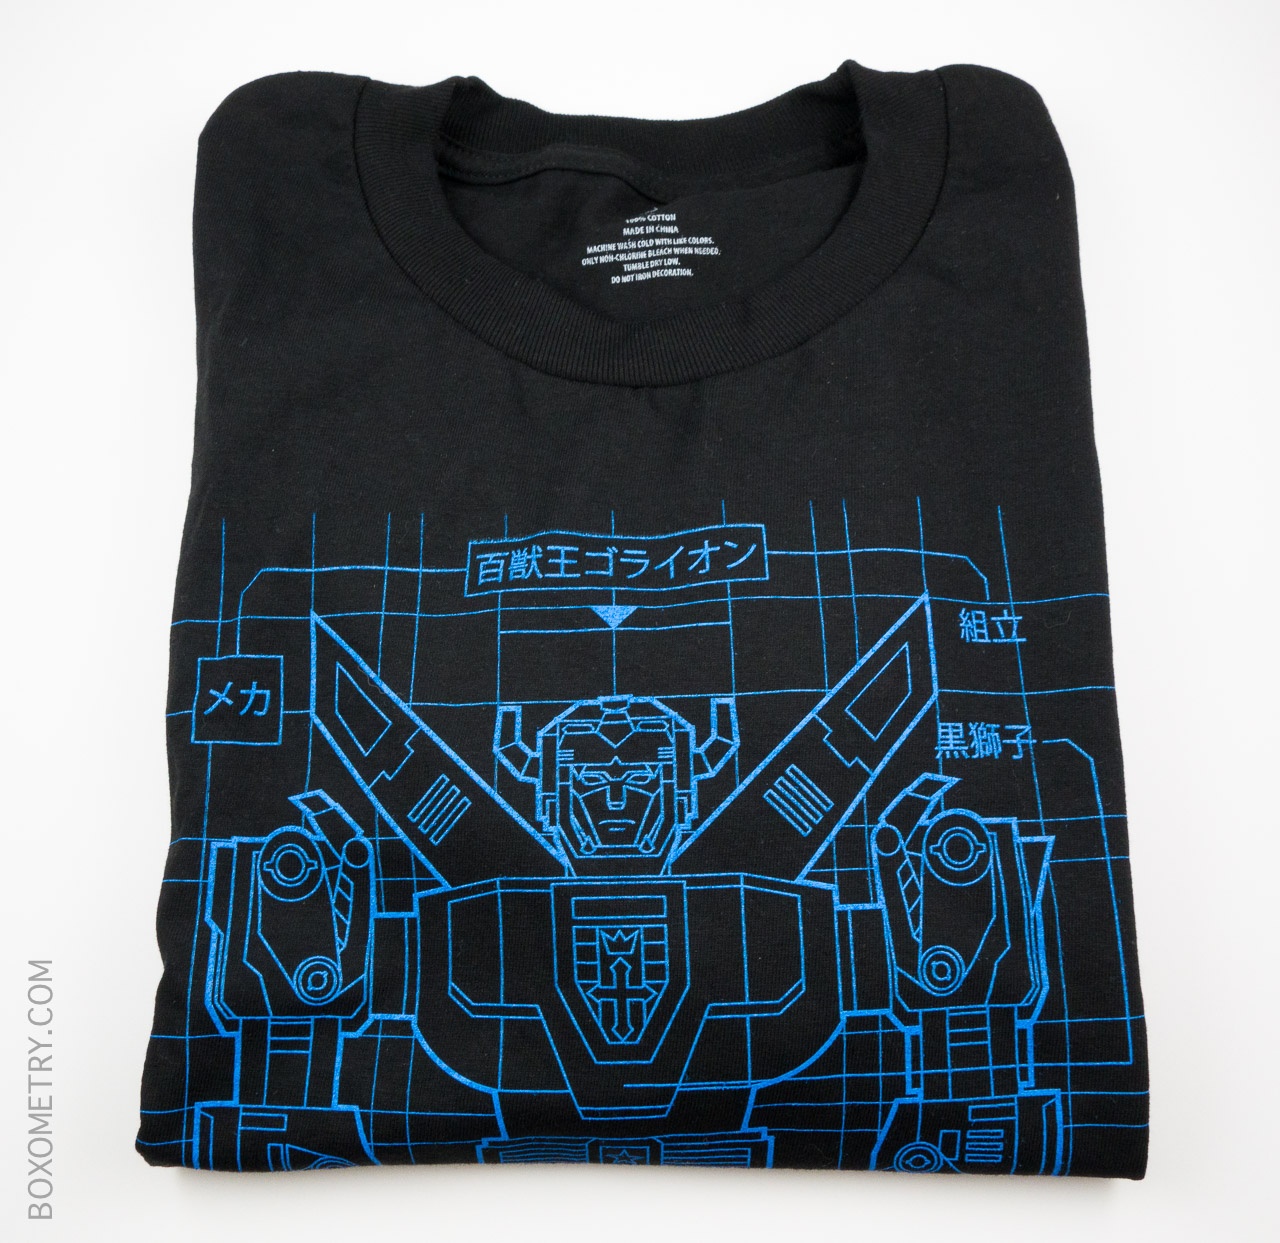 Loot Crate January 2015 Voltron Shirt